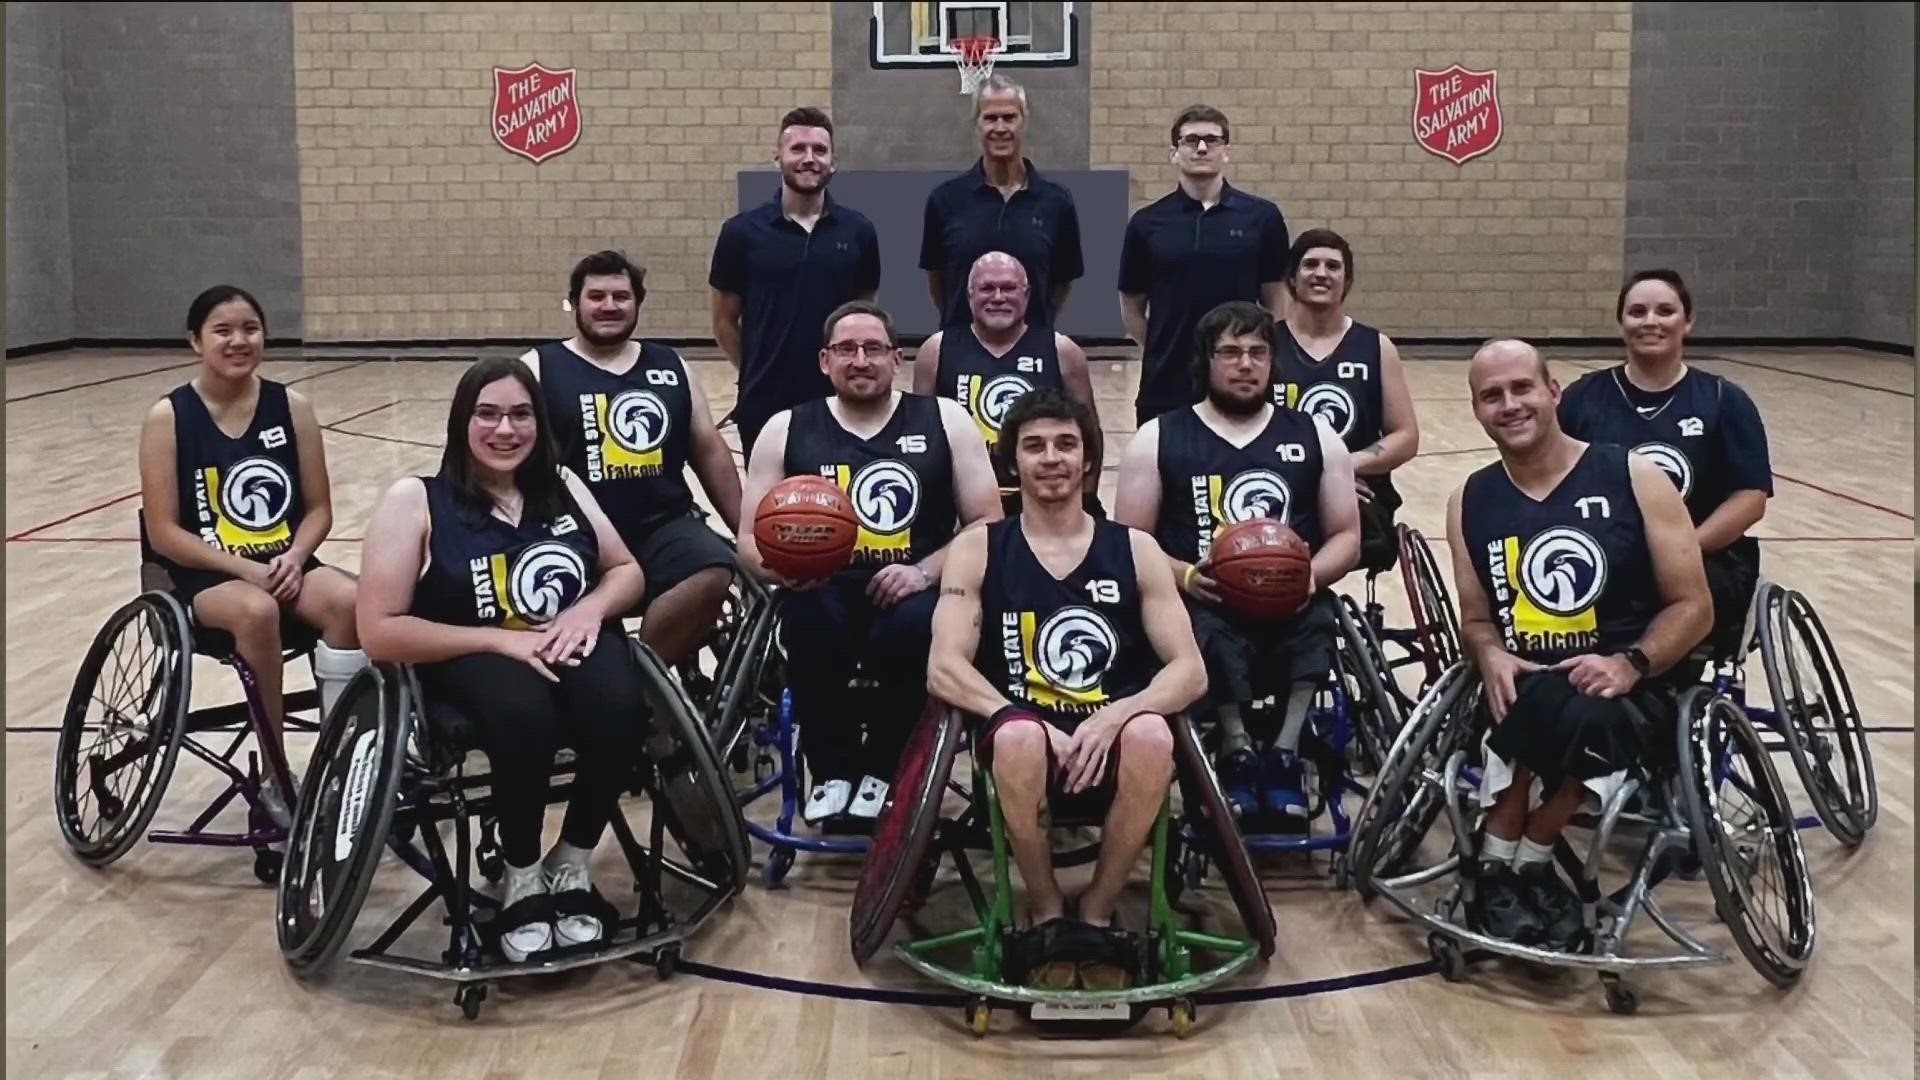 The Gem State Falcons are Idaho's very first NWBA team. The players have already played in three regional tournaments, and the team will be hosting one in February.